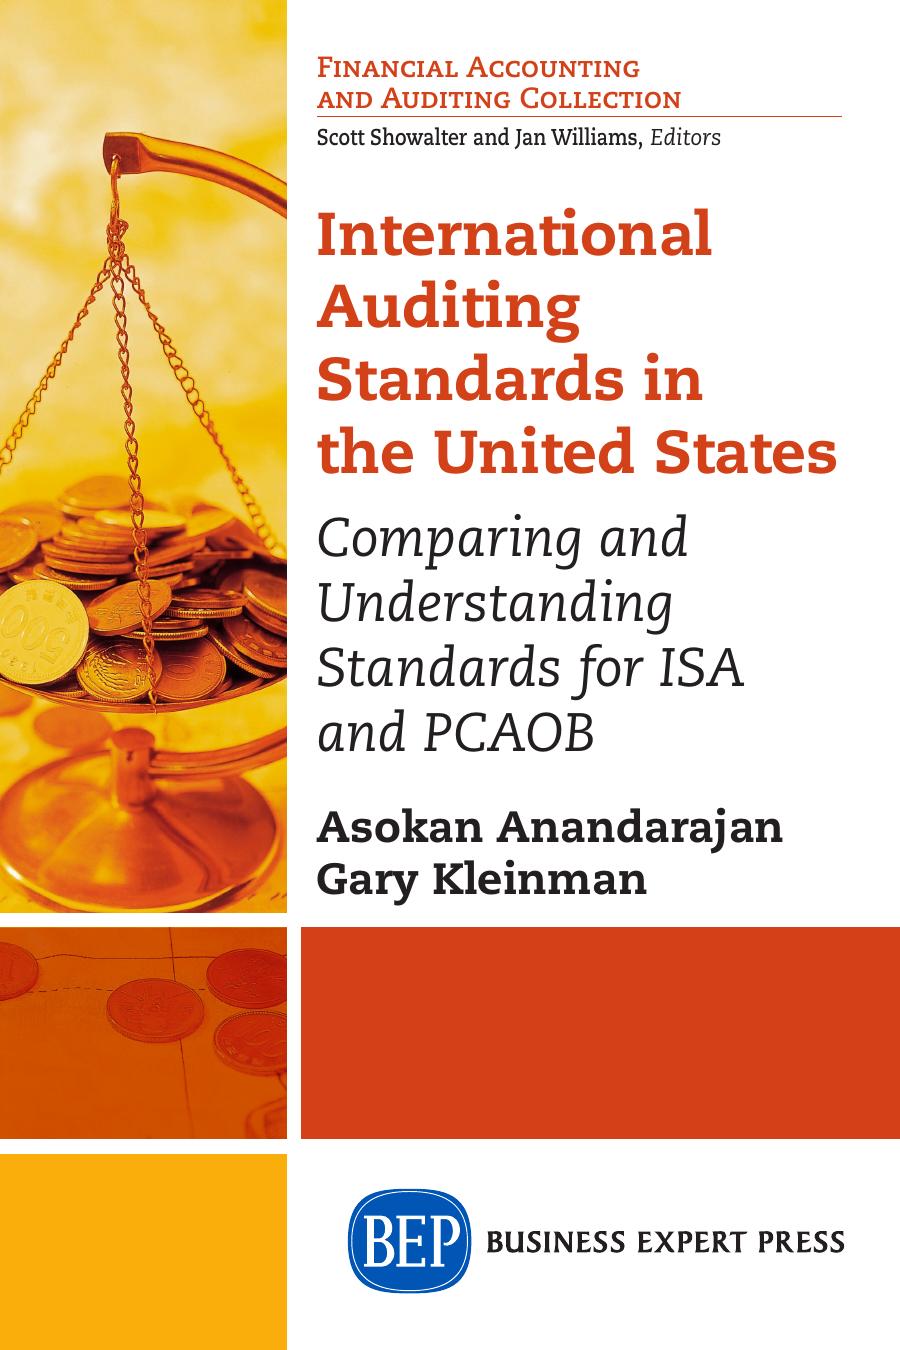 International auditing standards in the United States comparing and understanding standards for ISA and PCAOB 2015